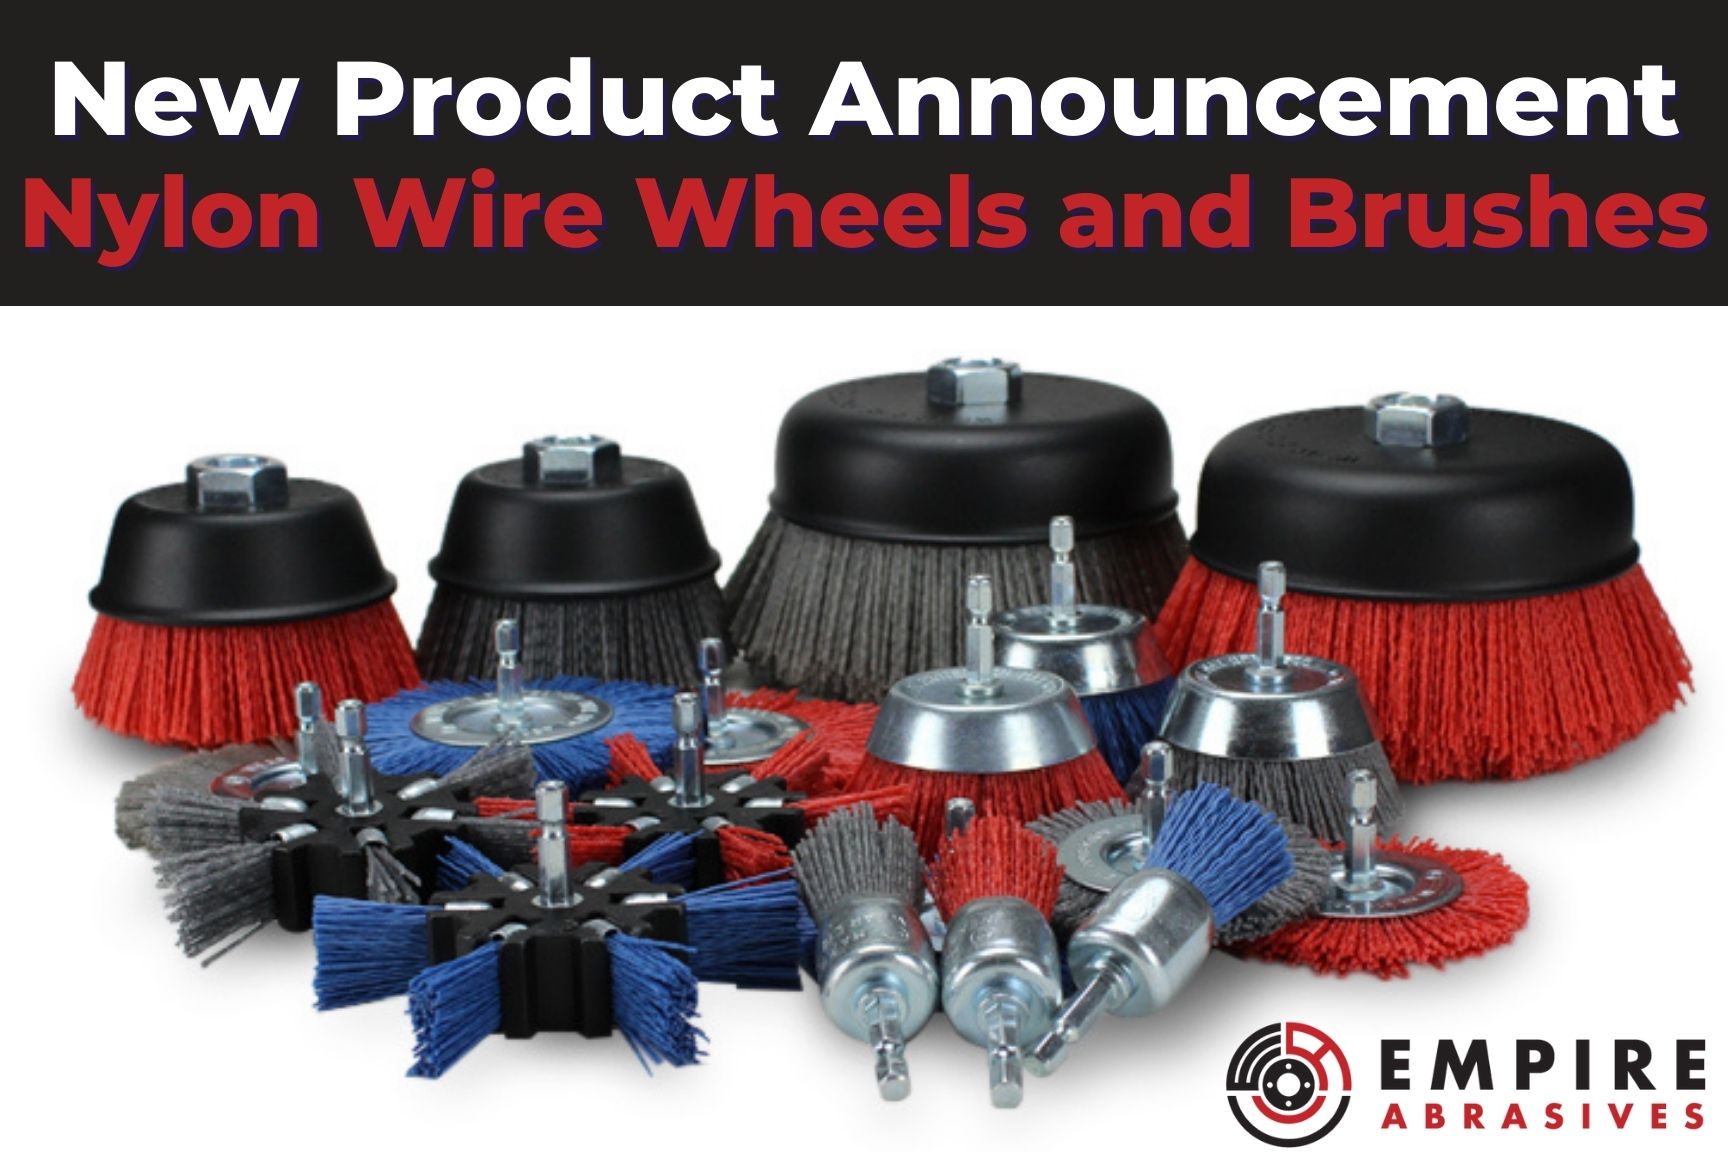 EmpireAbrasives.com - New Product Line - Abrasive Nylon Wire Wheels and Brushes